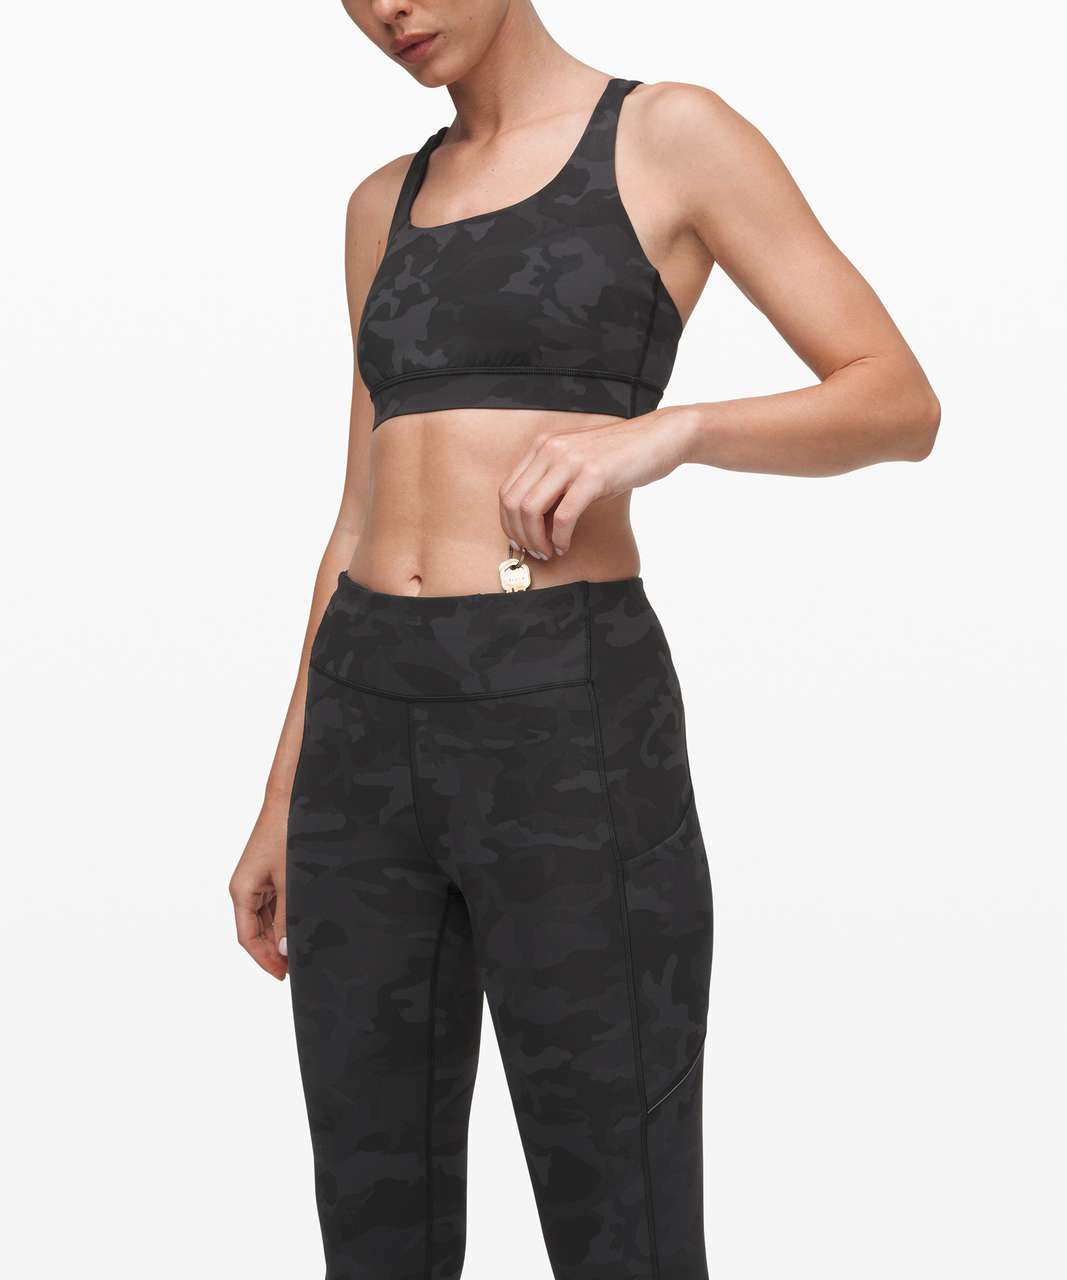 Lululemon Speed Up Crop *21" - Incognito Camo Multi Grey (First Release)